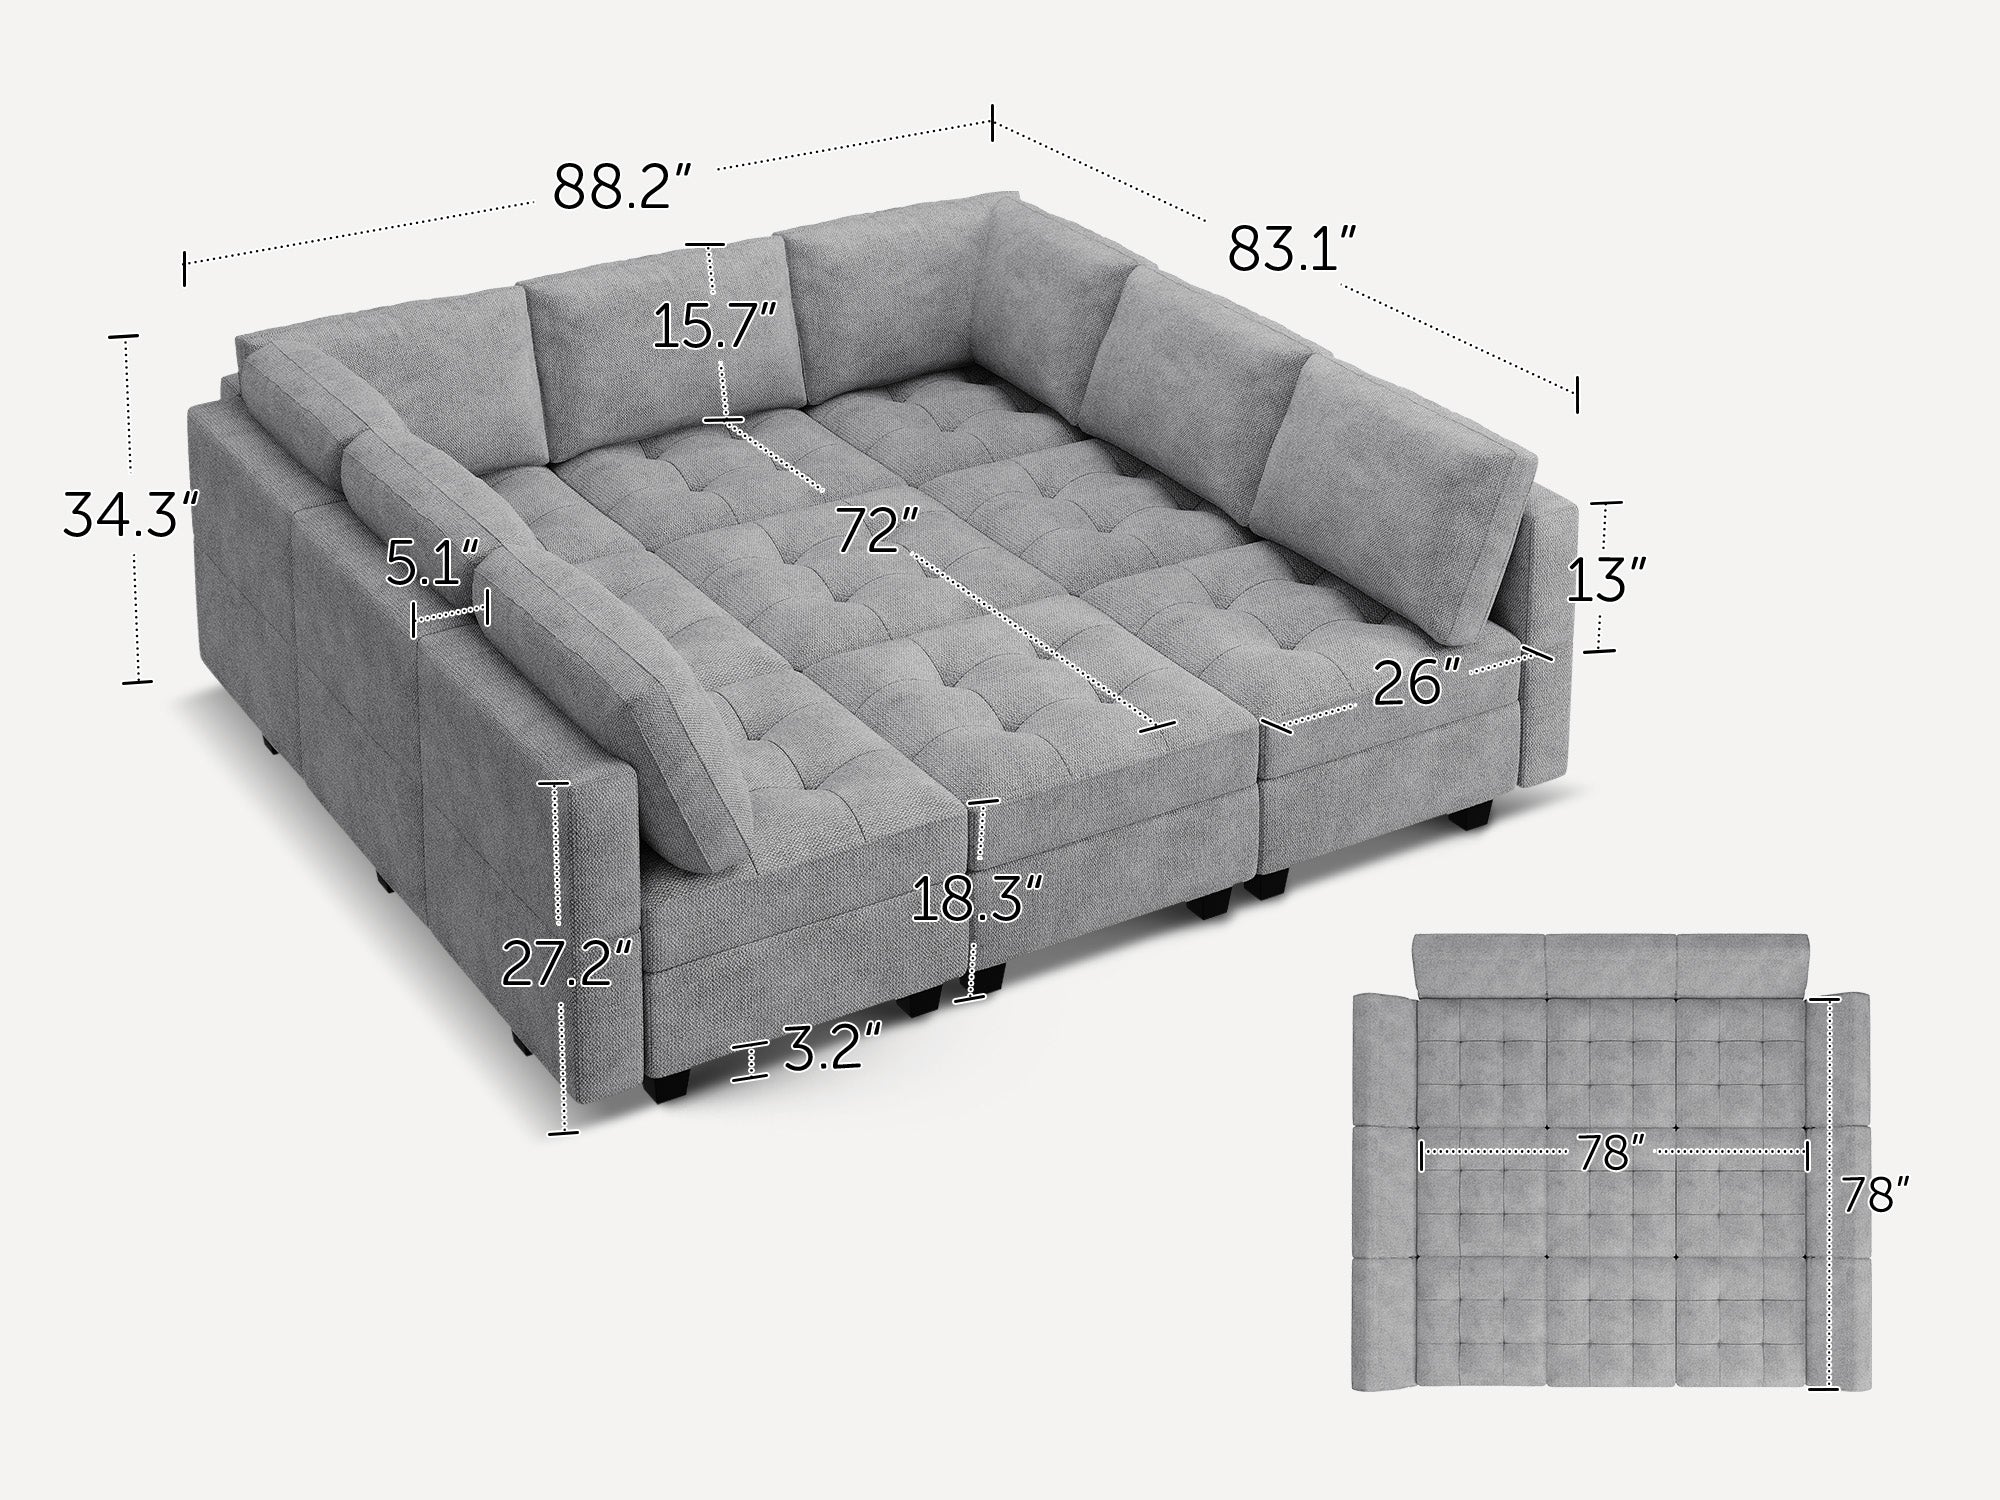 HONBAY 9-Piece Polyester Modular Sleeper Sectional Adjustable Sofa With Storage Seat